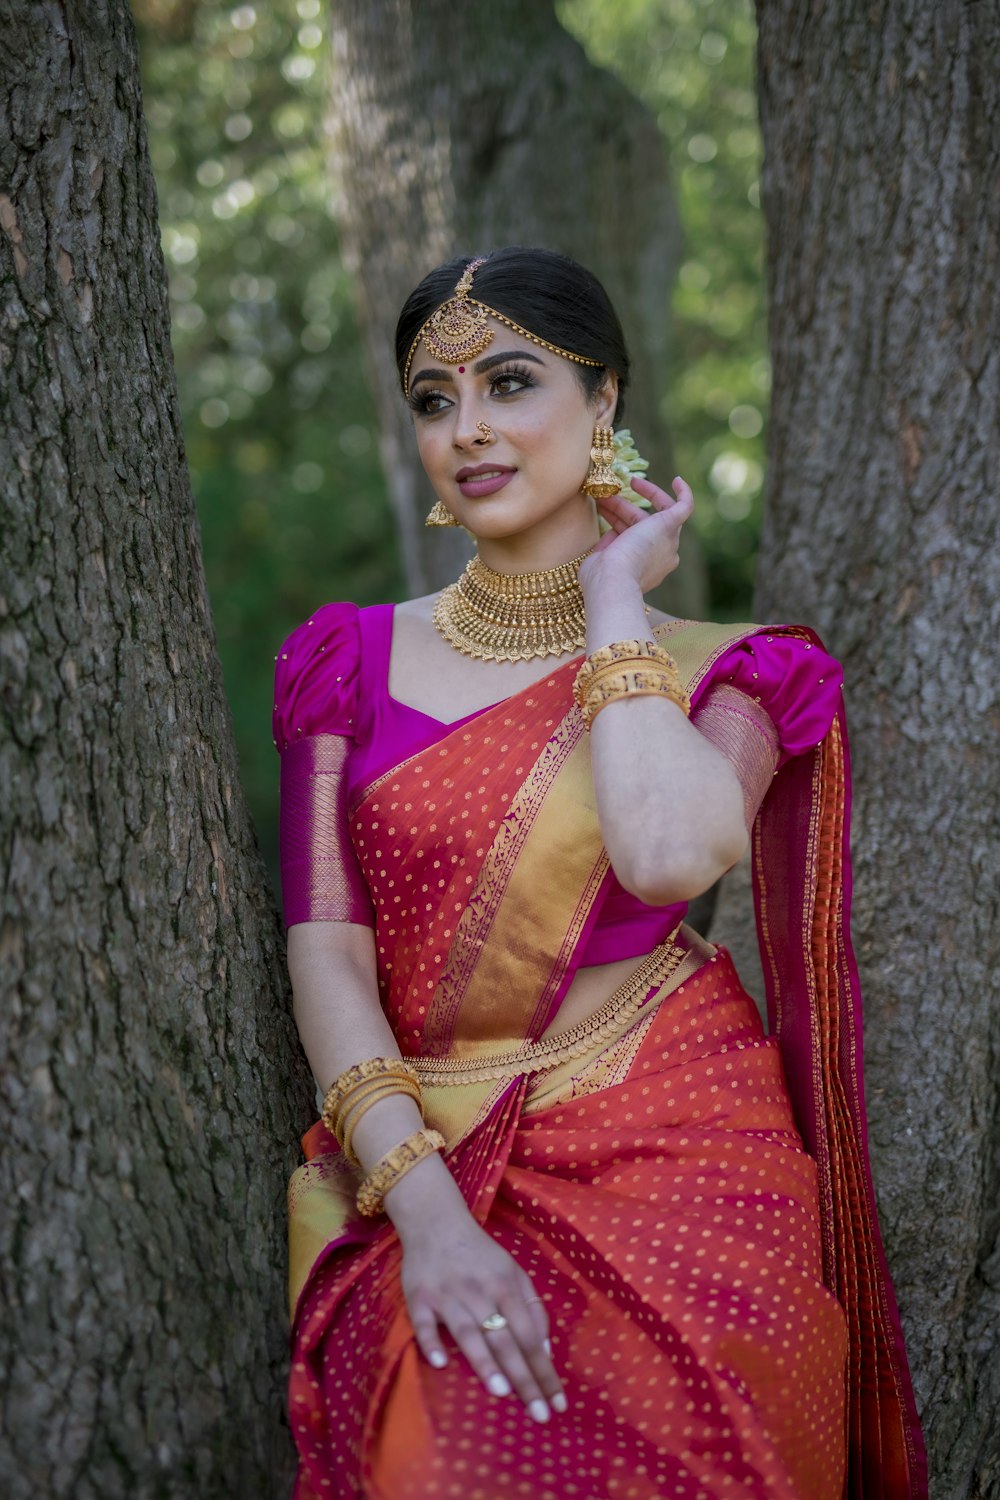 1000+ Girl In Saree Pictures | Download Free Images on Unsplash